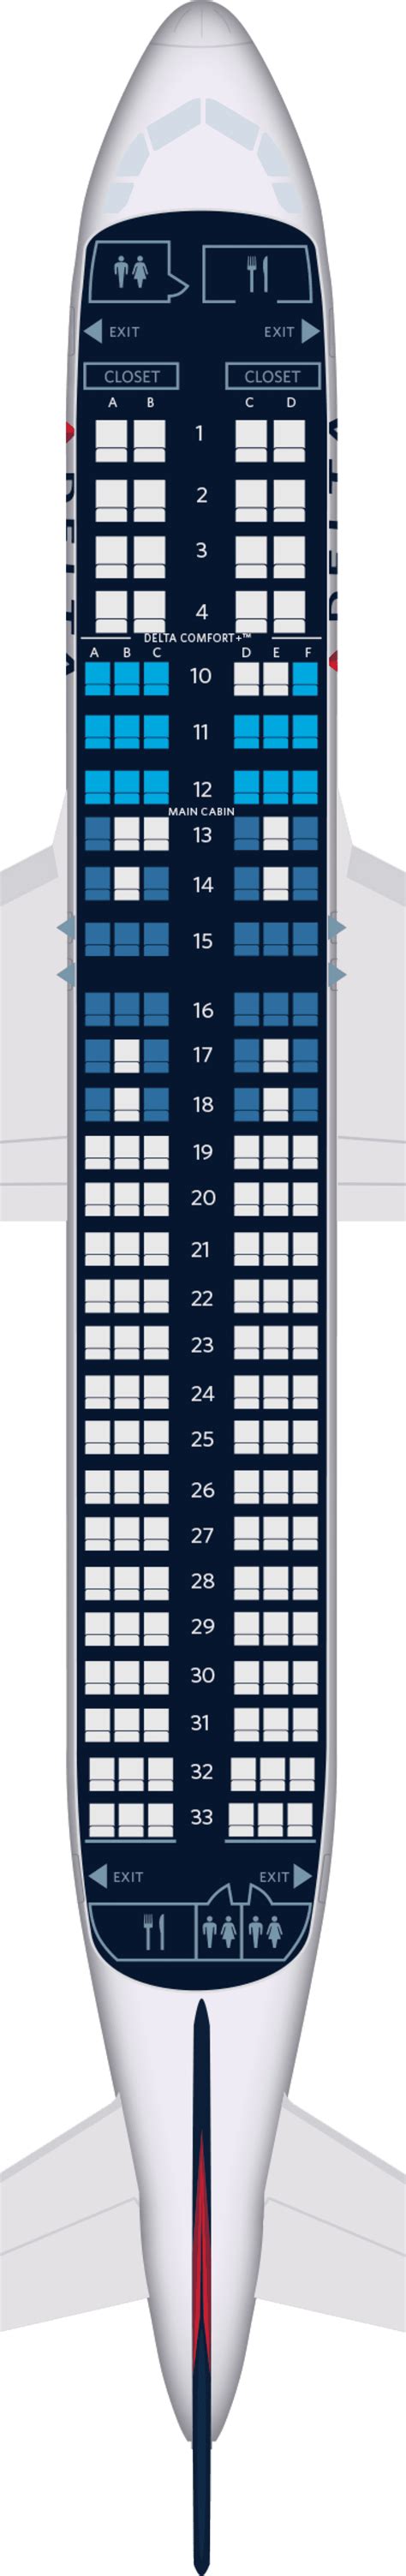 Delta Seating Chart Covid Cdc Classifies Delta Variant As Variant Of